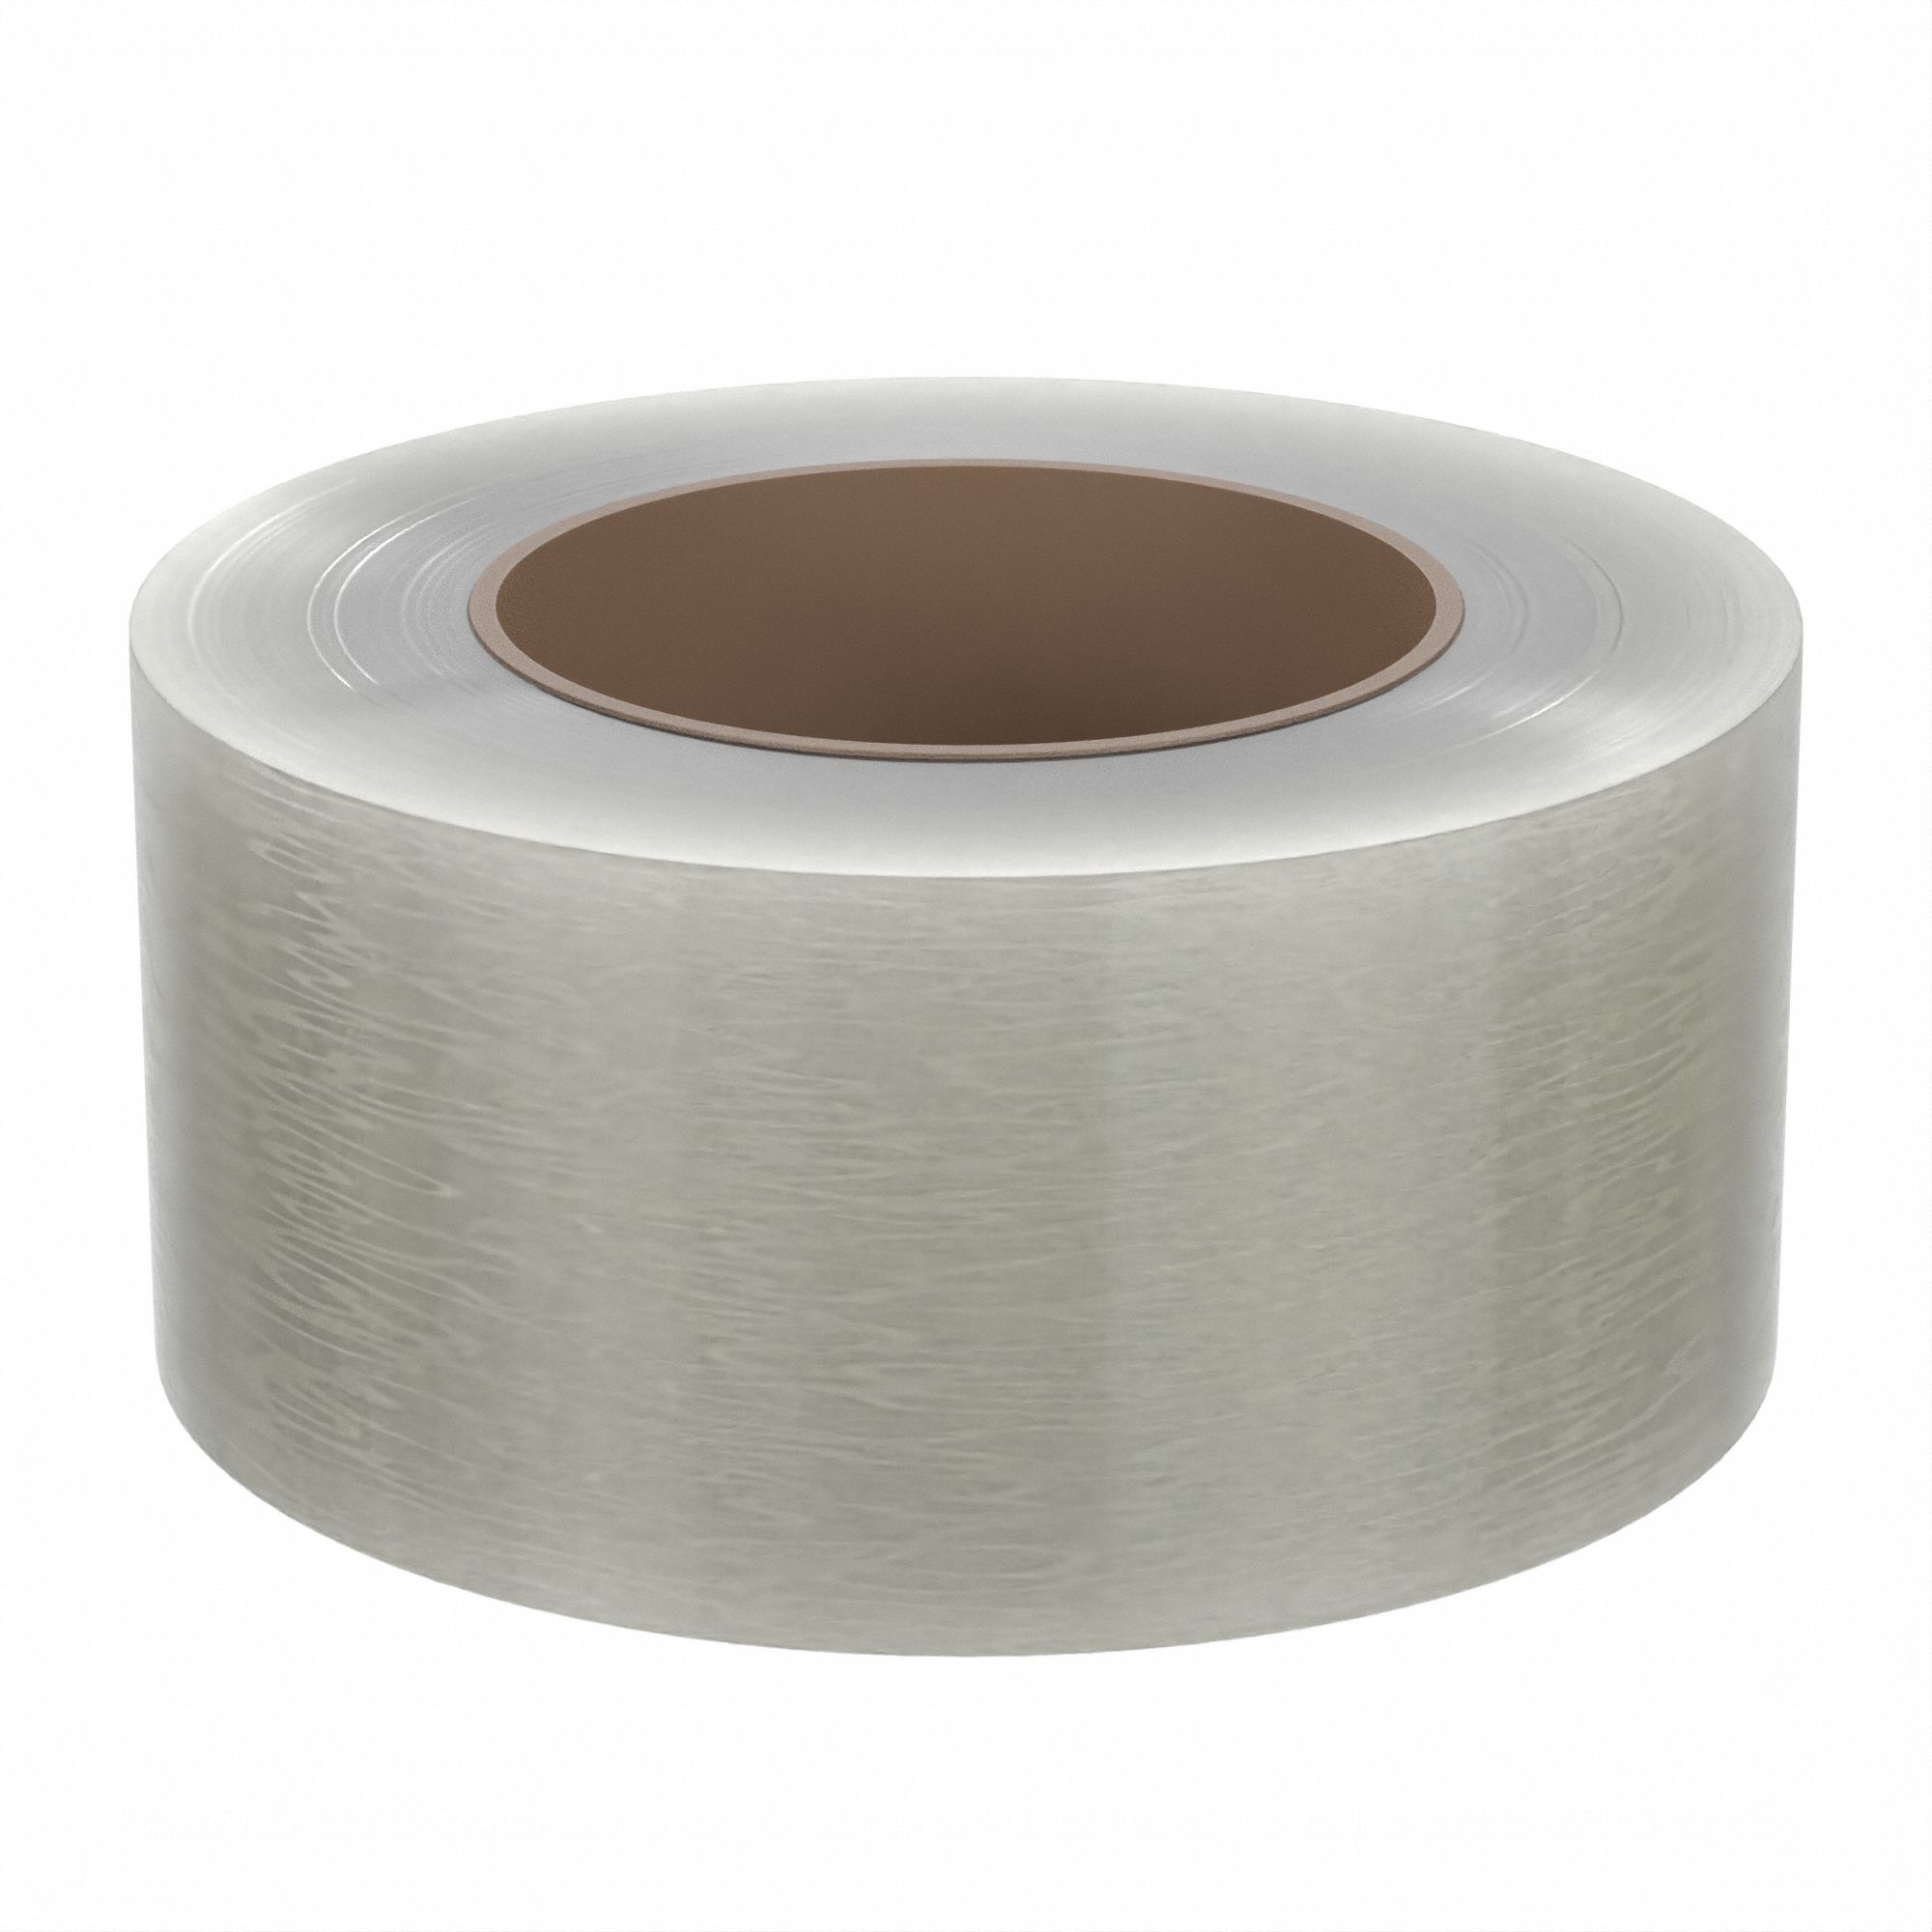 Tape, Packing Tape, 3M Scotch 375 Carton Sealing Tape, 3.1 Mil, 3" x  55 Yds., Clear - Pkg Qty 24